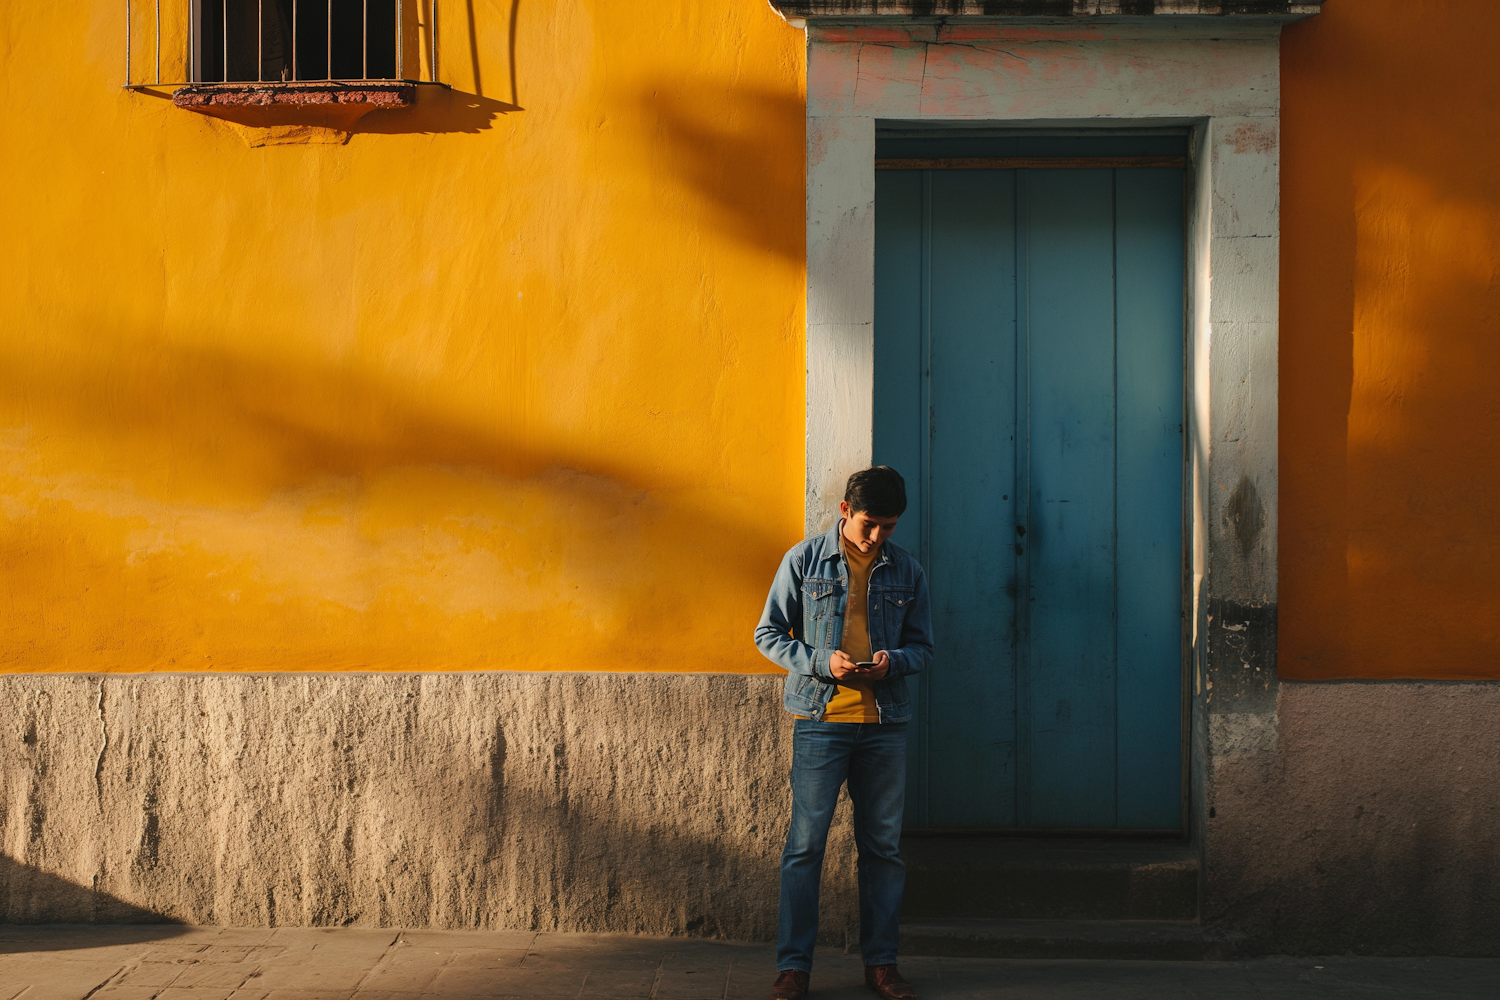 Urban Casual: Man with Smartphone against Yellow and Blue Backdrop